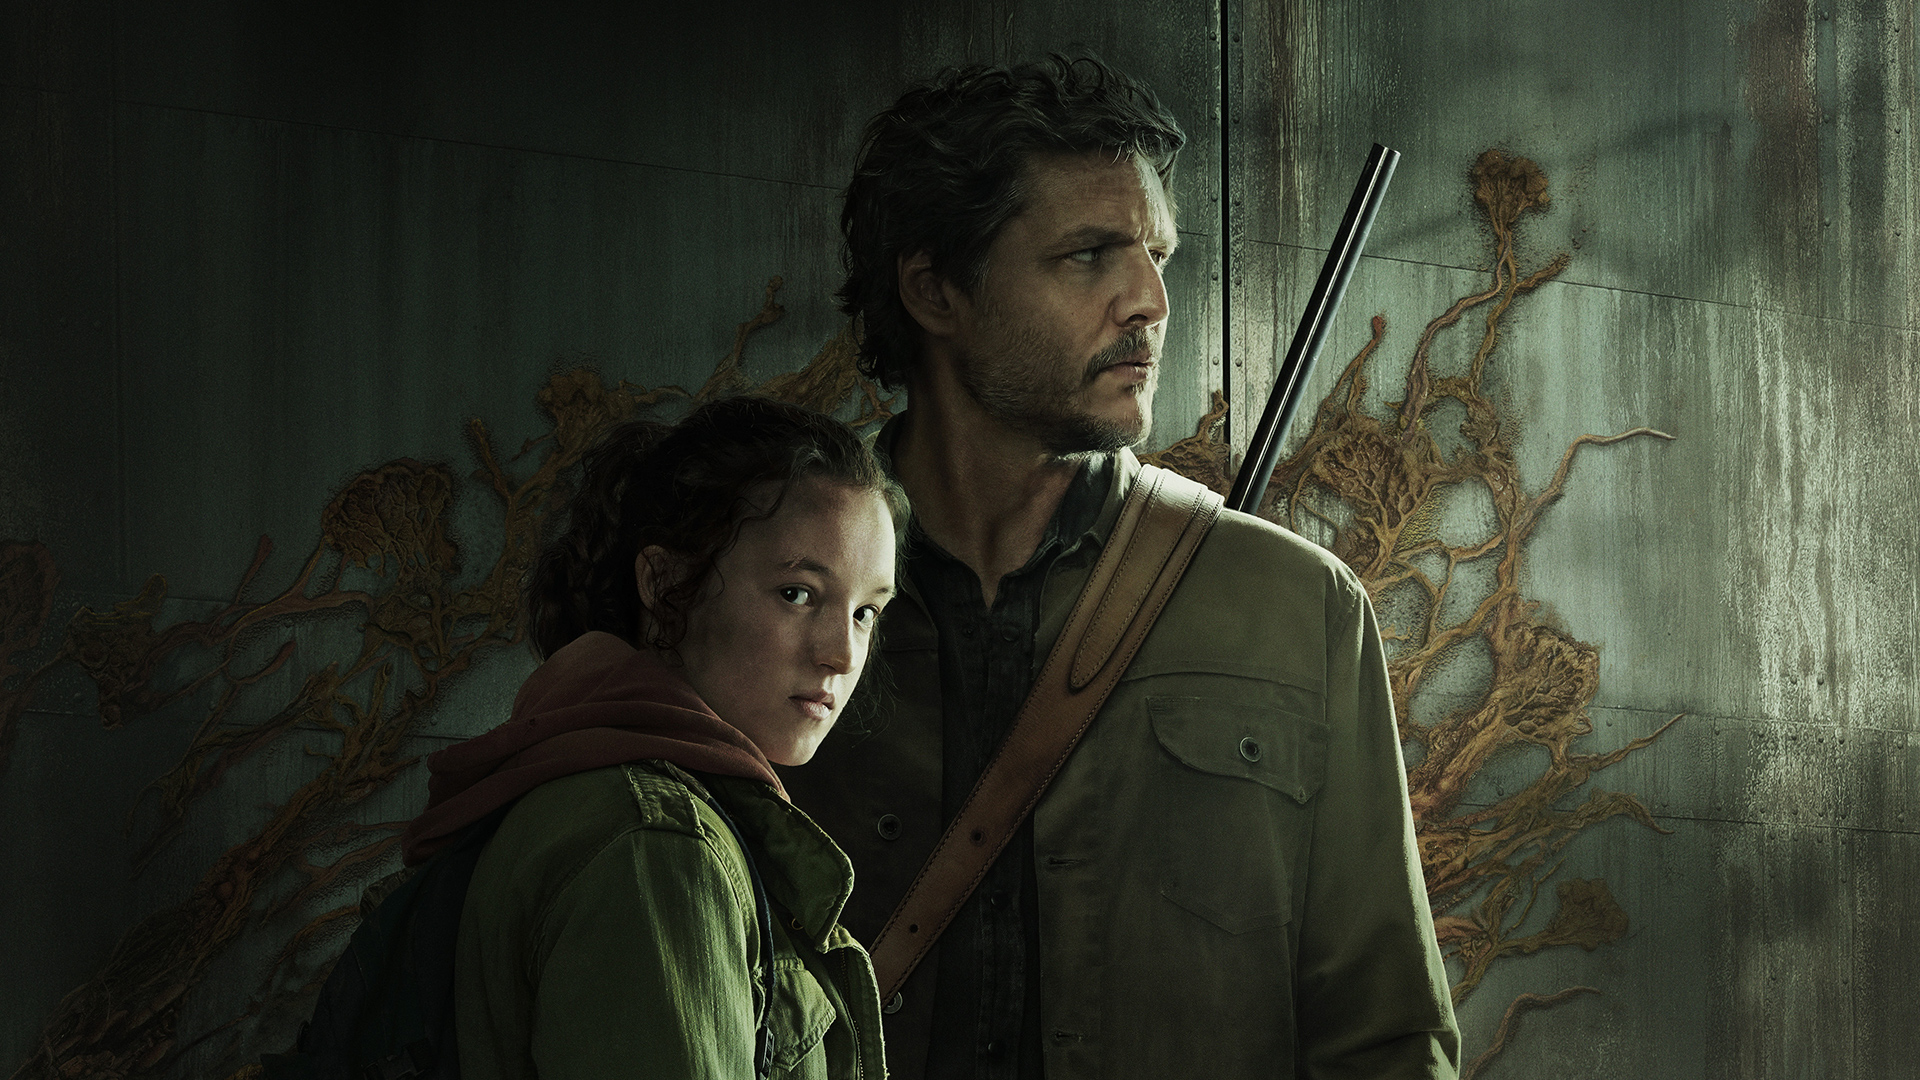 Get a year of HBO Max for $30 off before The Last of Us debuts